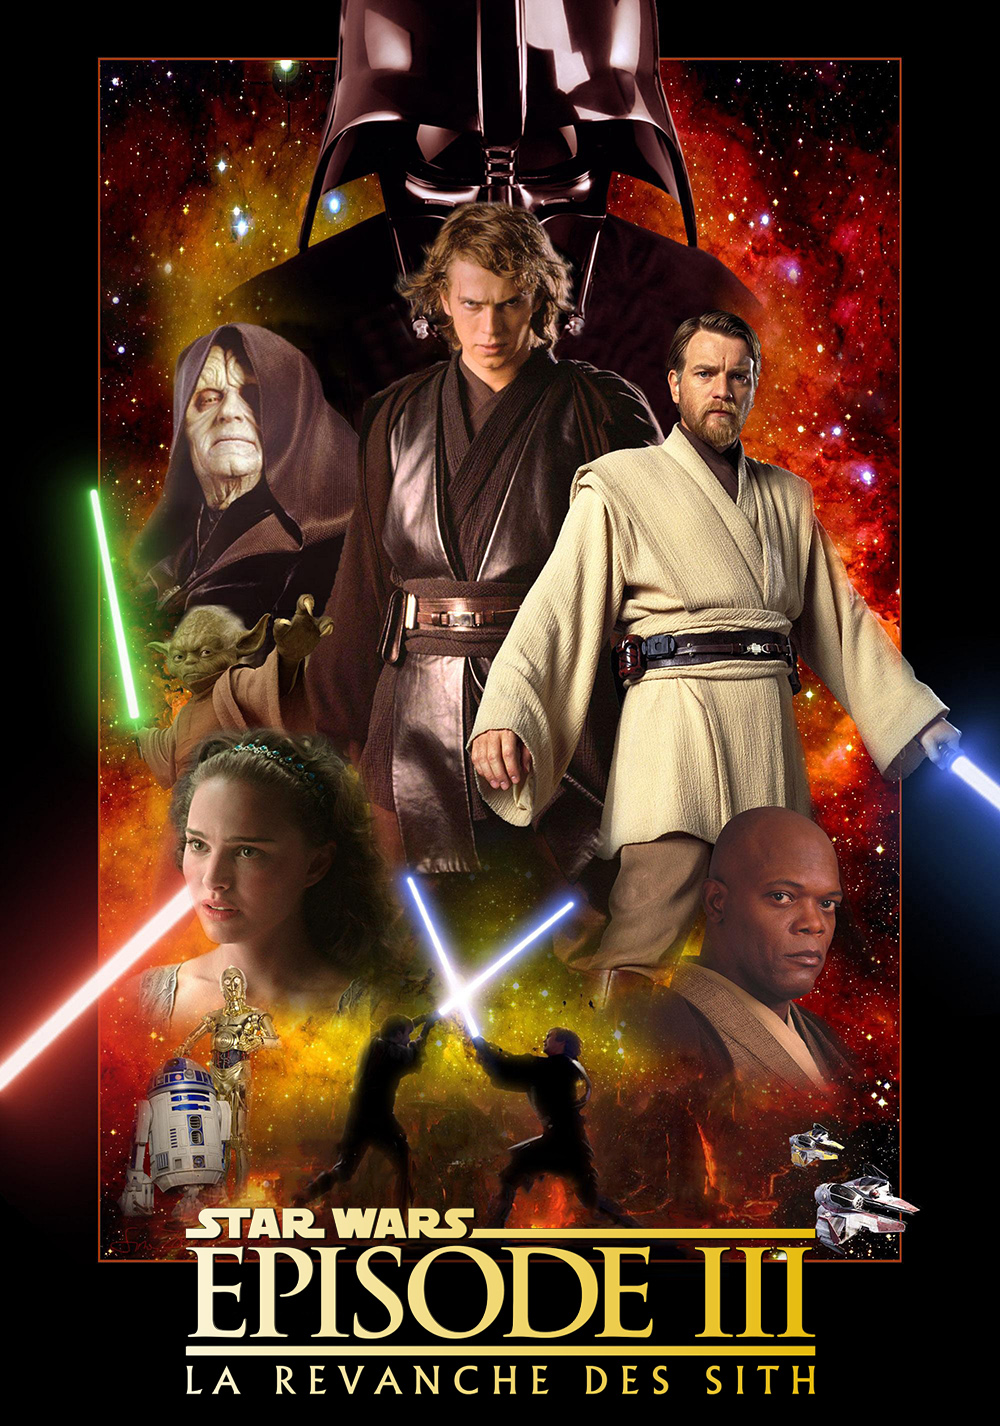 Star Wars Ep. III: Revenge of the Sith for windows download free